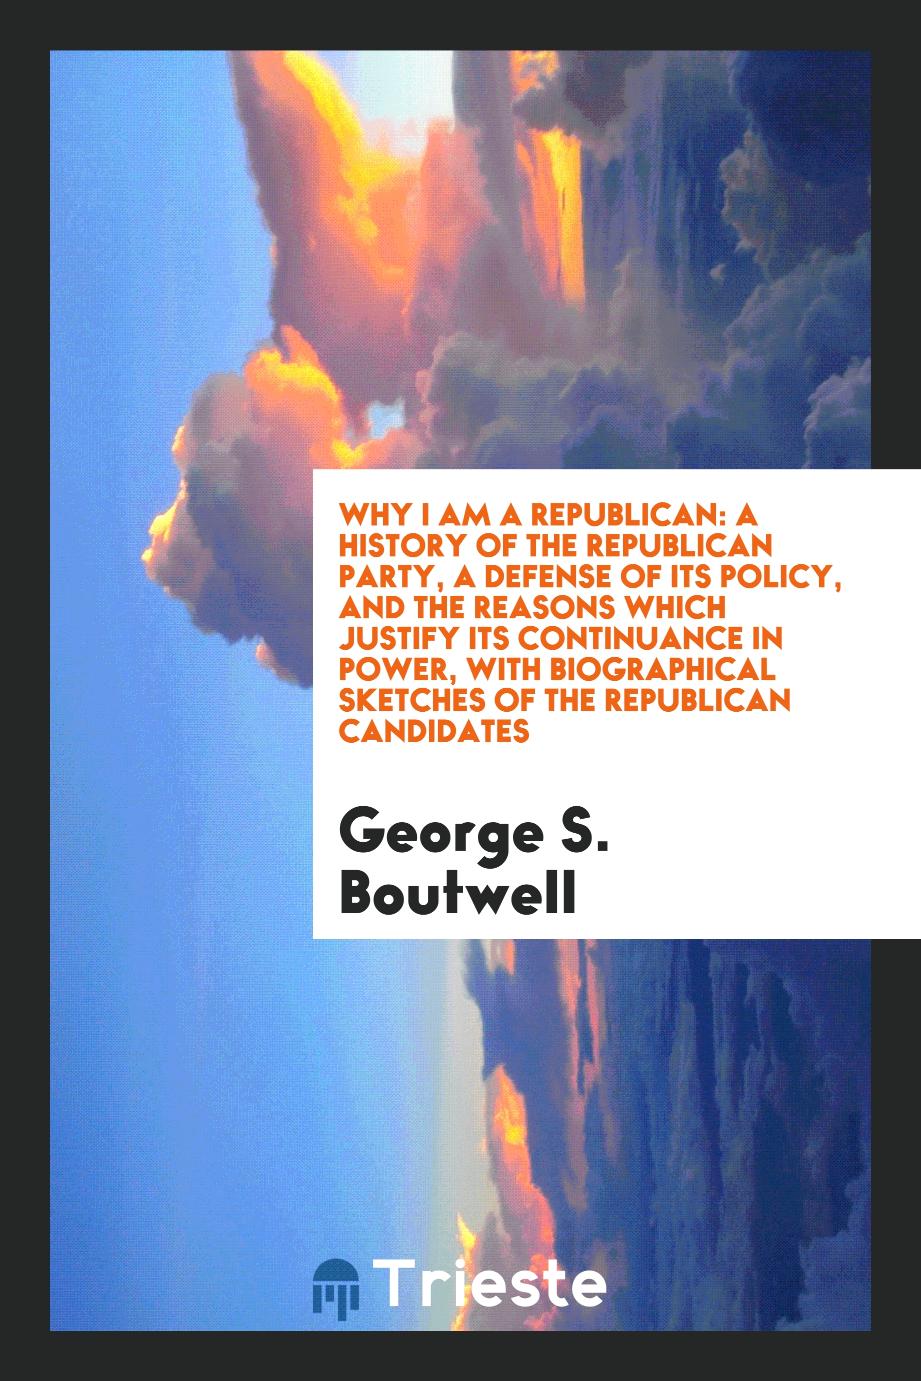 Why I am a Republican: a history of the Republican party, a defense of its policy, and the reasons which justify its continuance in power, with biographical sketches of the Republican candidates